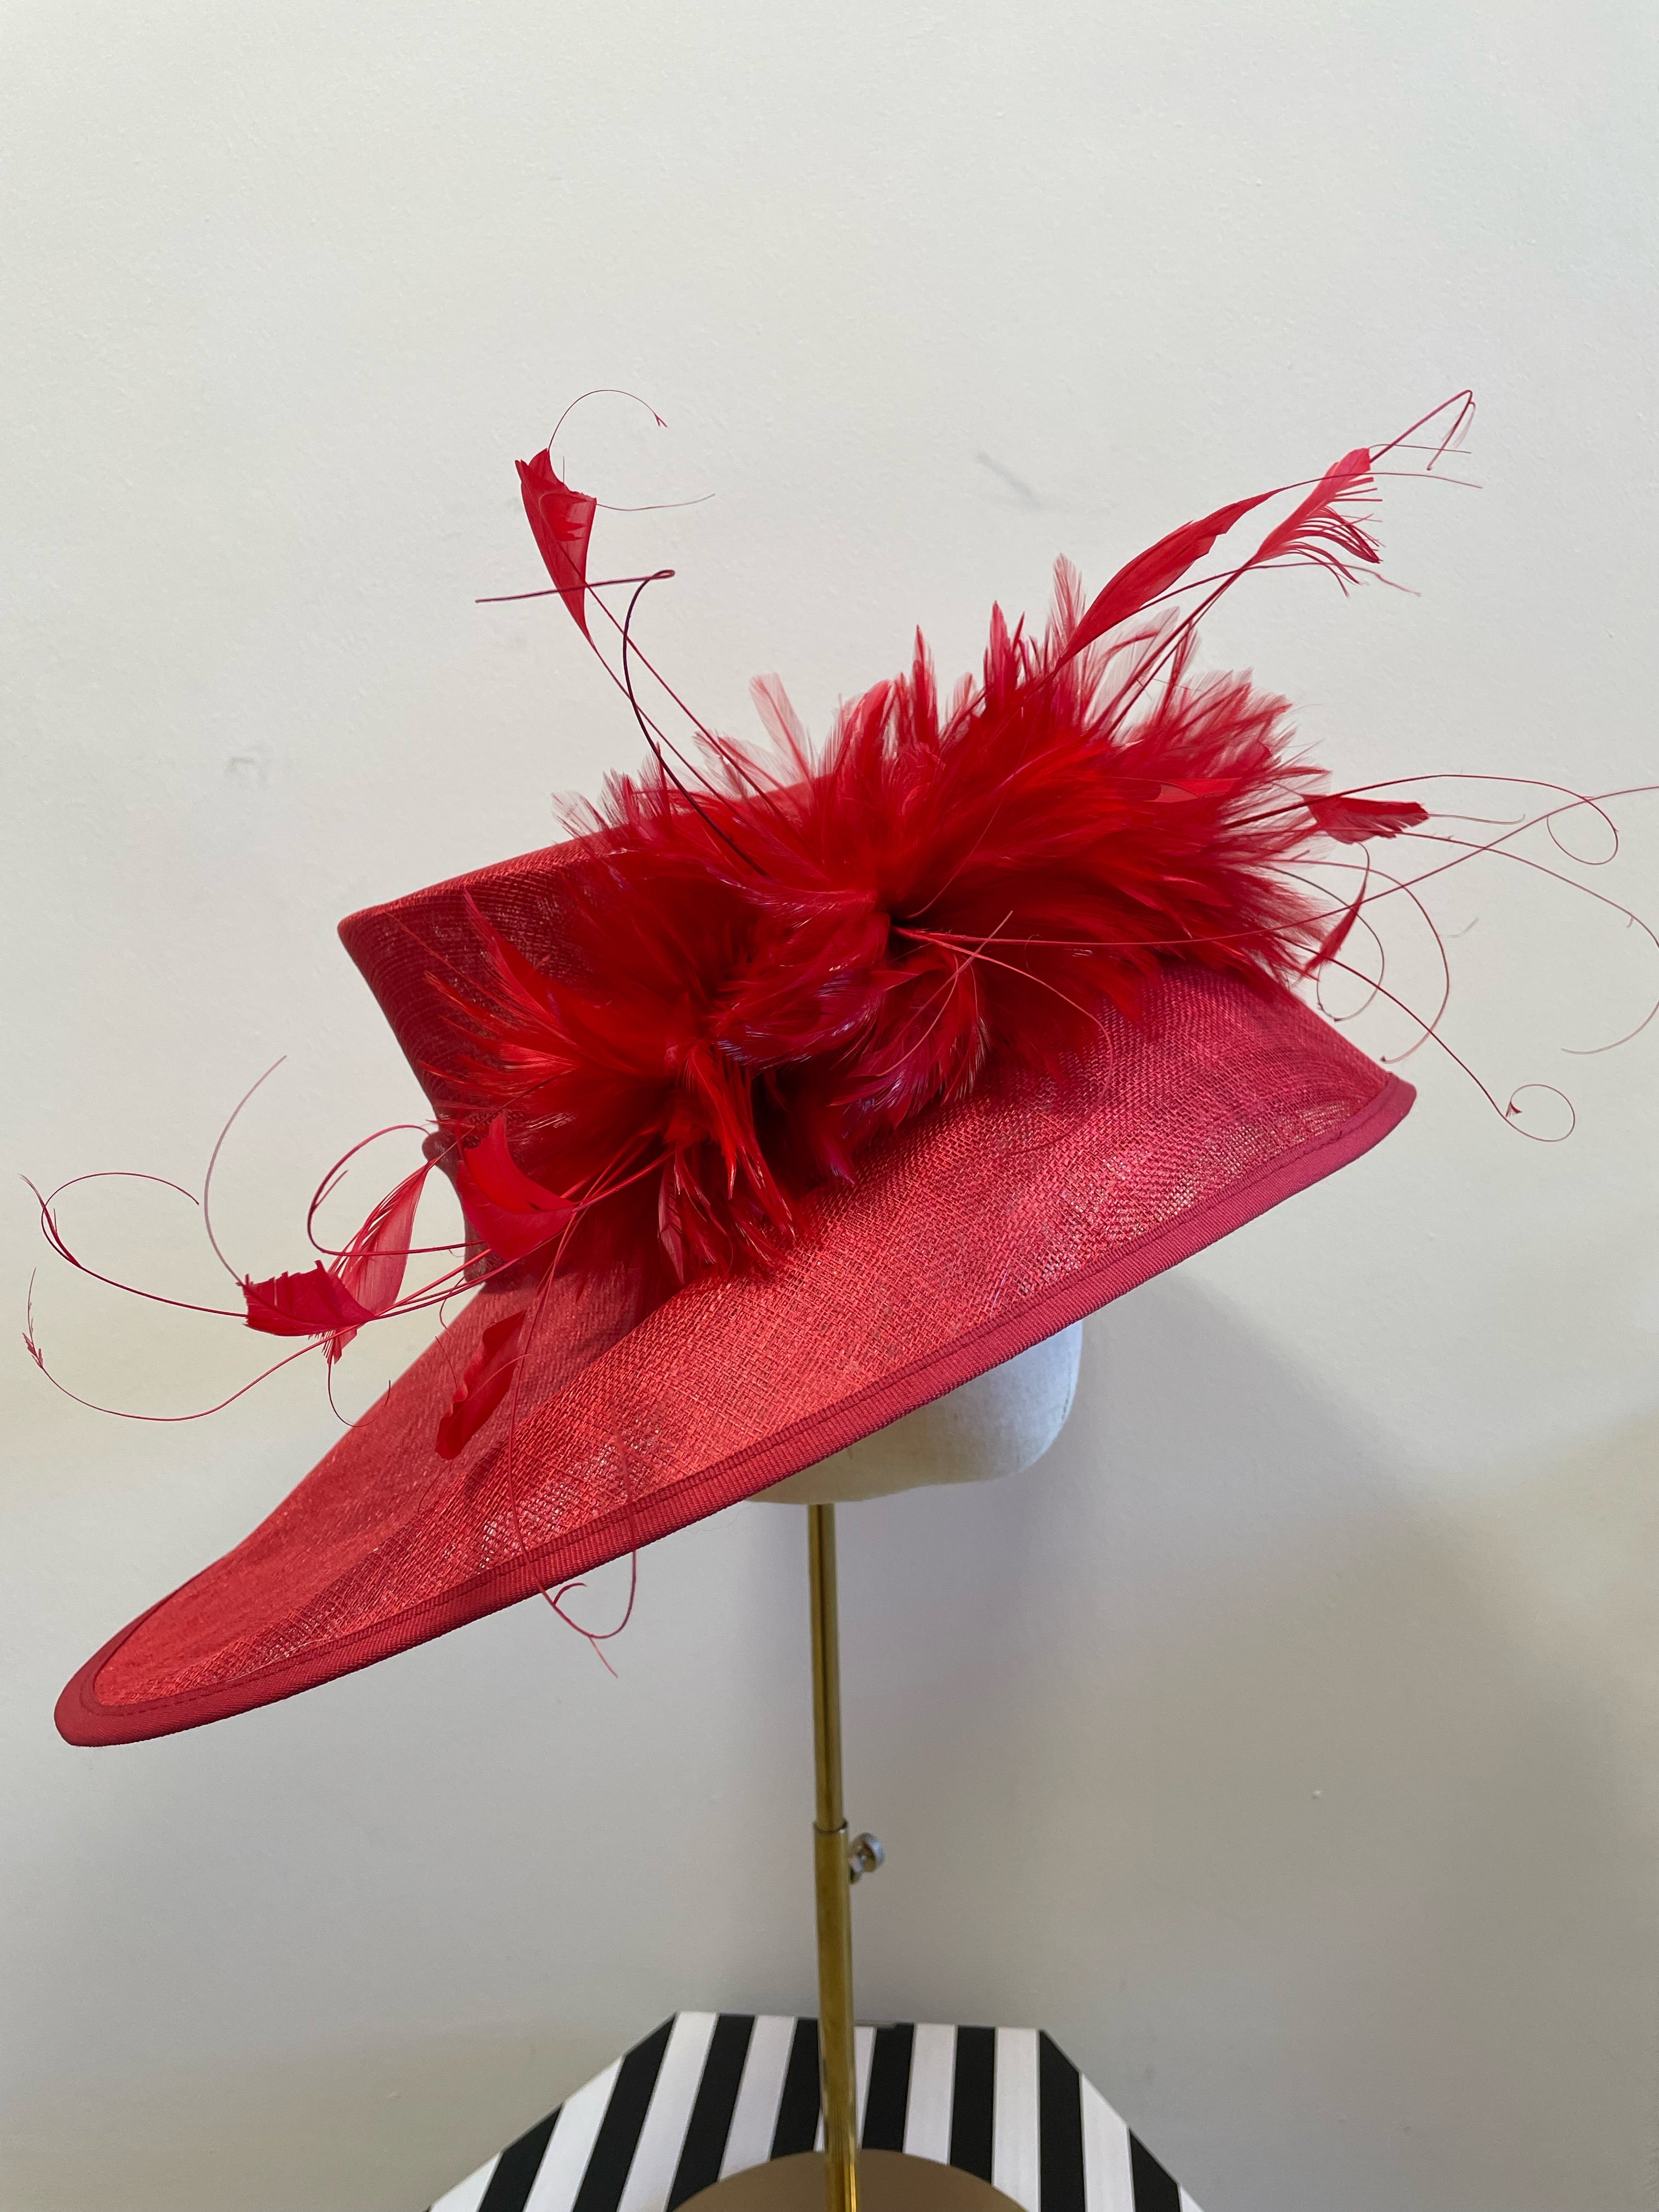 Red Wedding Hat with Feathers